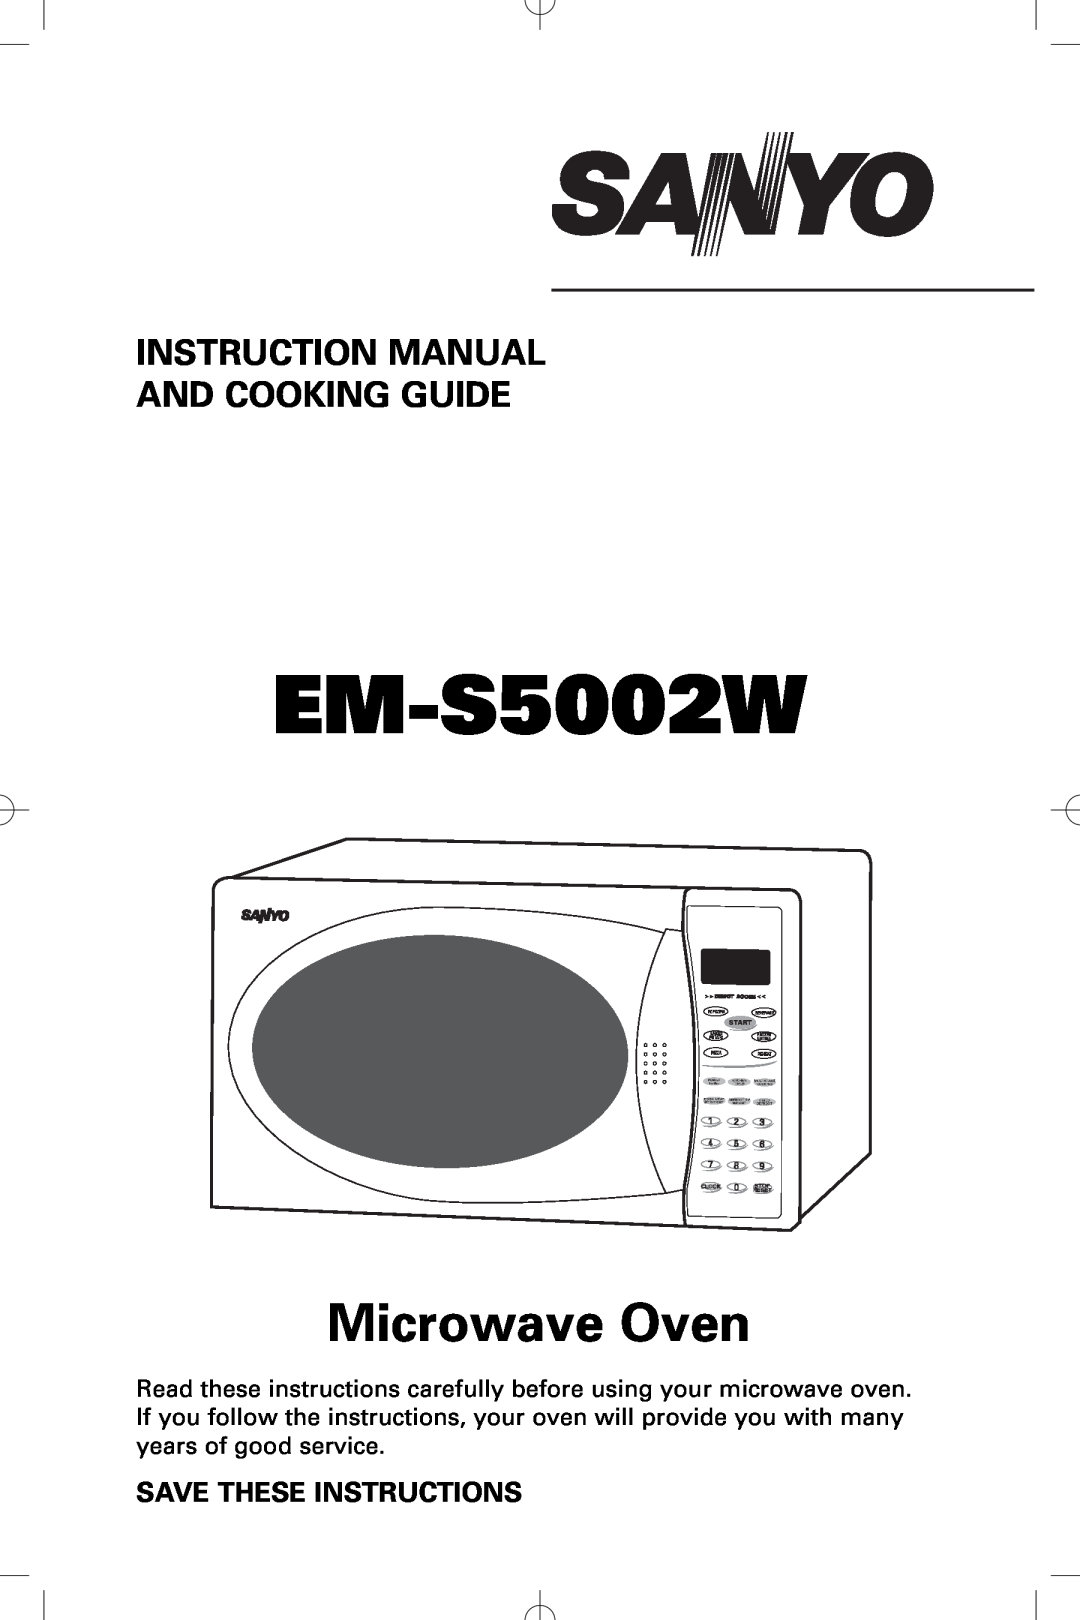 Sanyo EM-S5002W instruction manual Save These Instructions, Microwave Oven 